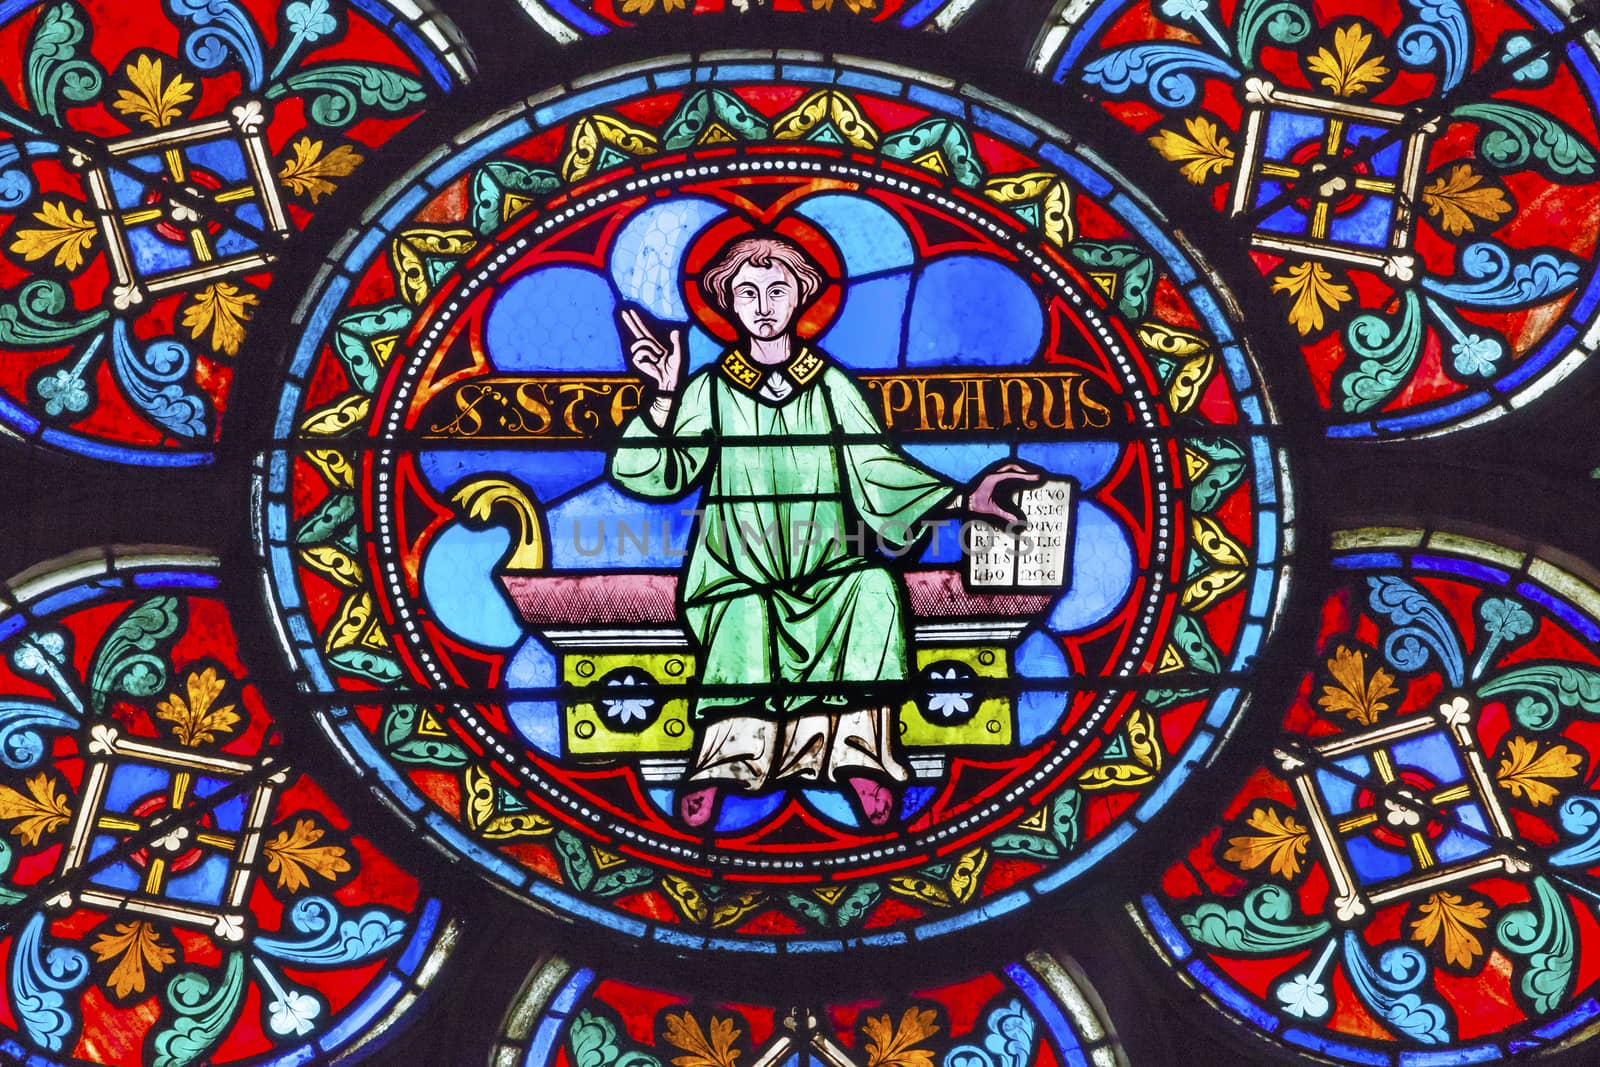 Saint Stephen Stained Glass Notre Dame Cathedral Paris France.  Notre Dame was built between 1163 and 1250AD.  